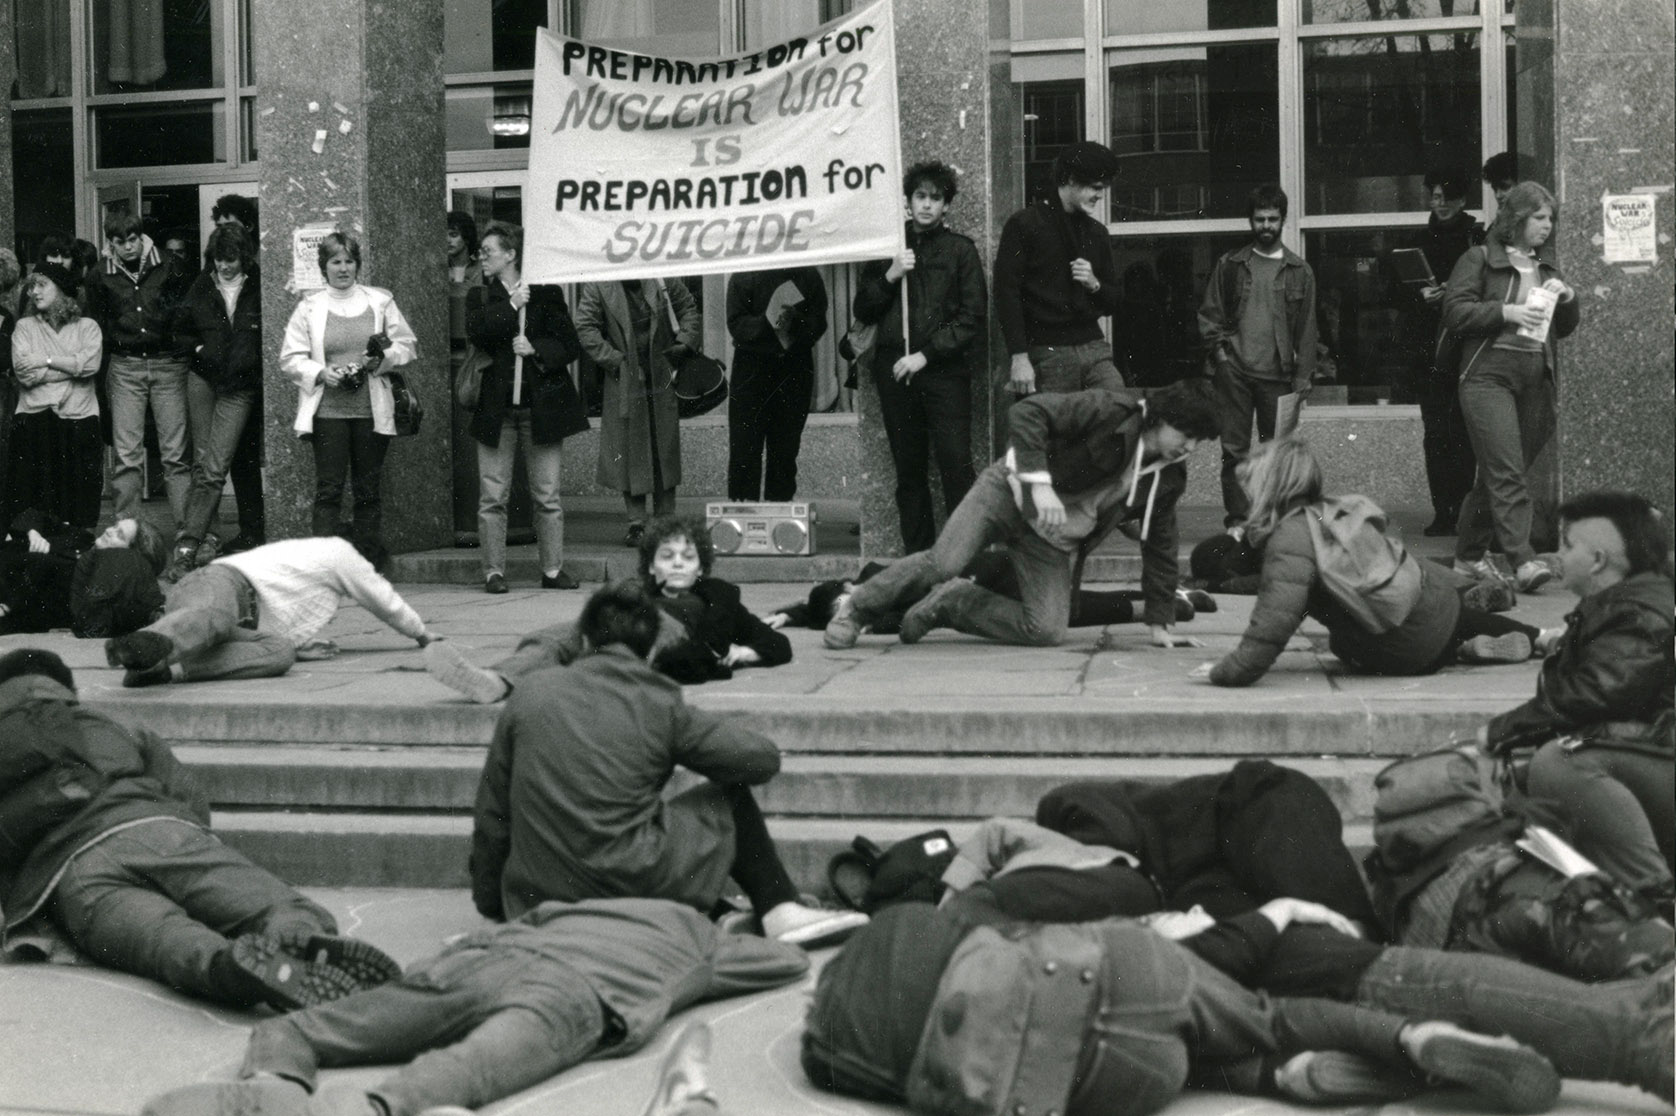 Depiction of Die-in at the Student Union